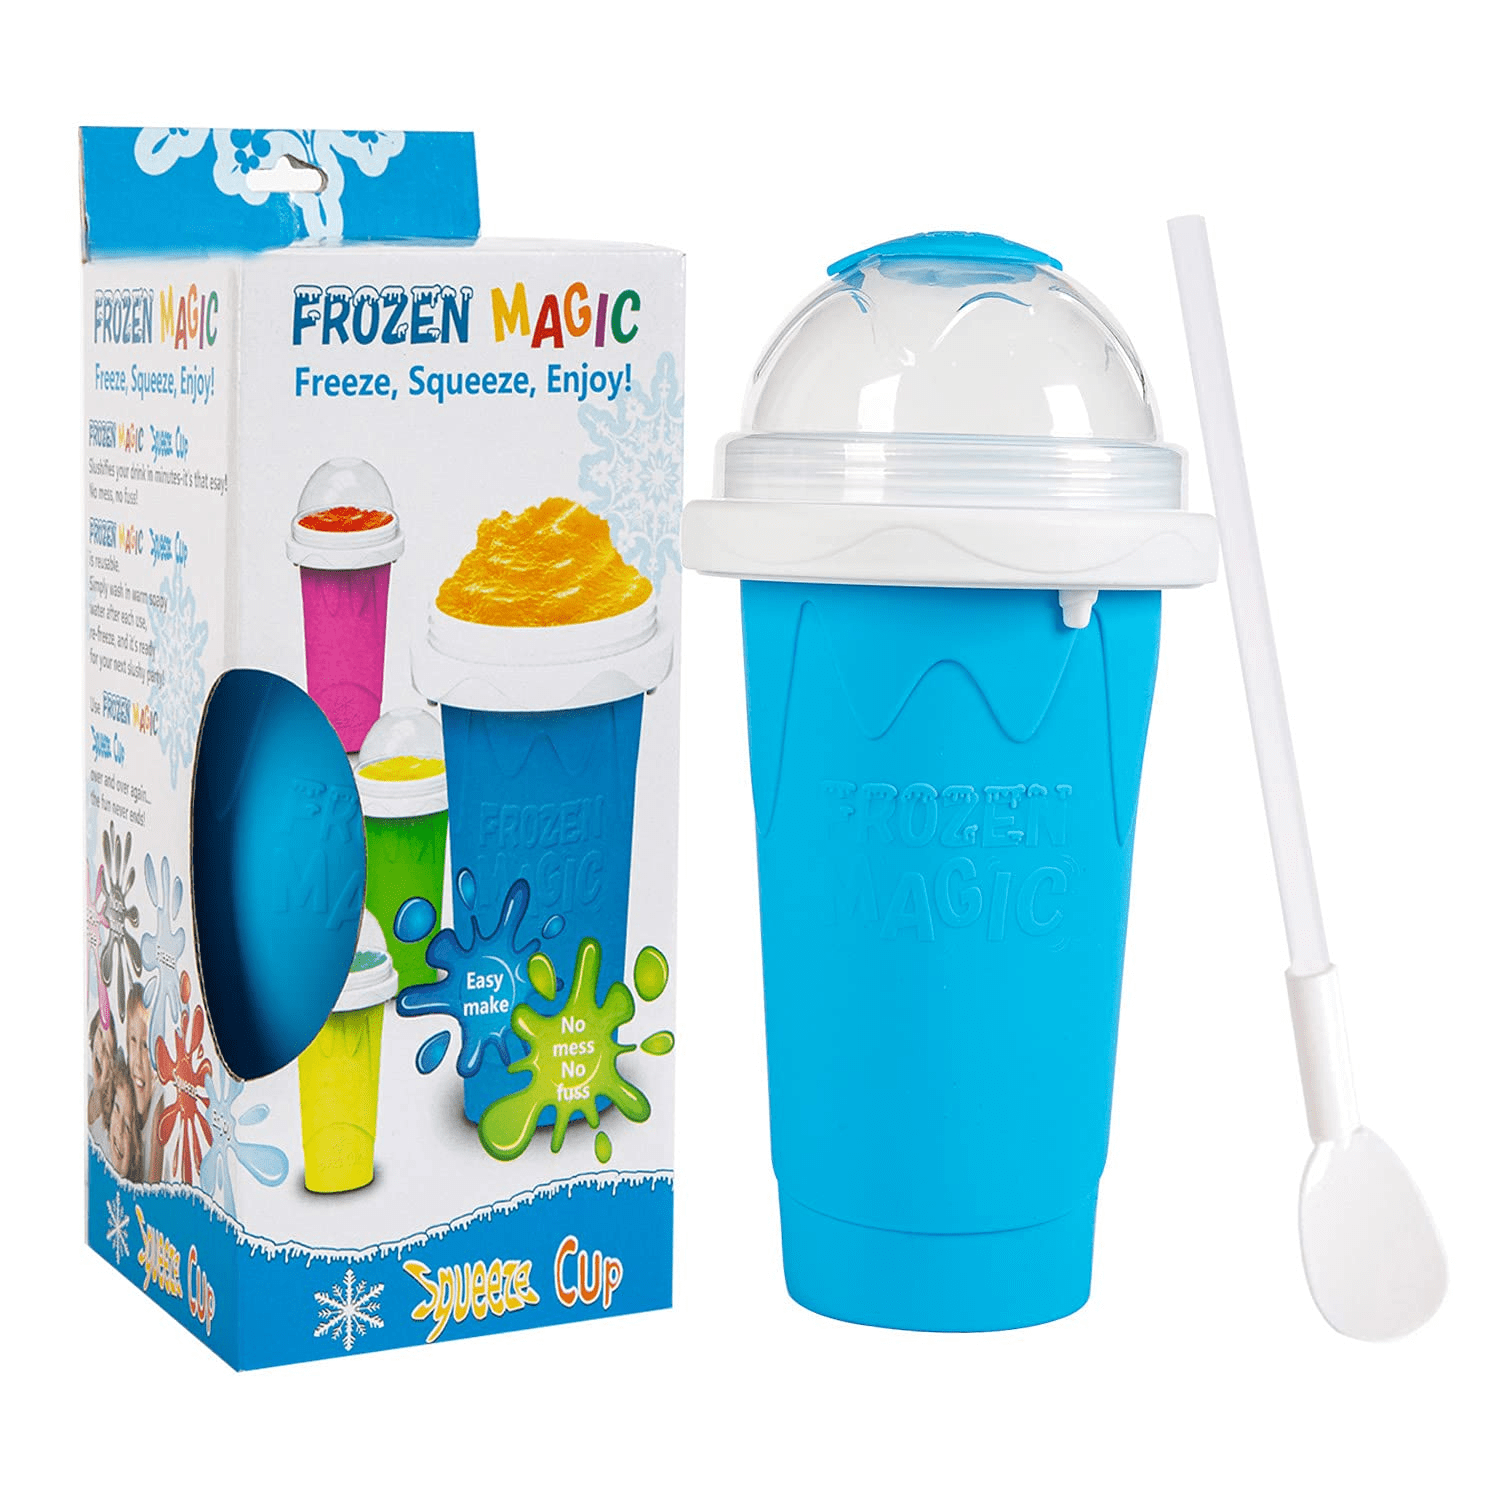 Icee Slushy Shaver Frozen Magic Cup Yellow Create a Slushy From Your Favorite Drinks in Less than a Minute Slushy Maker Cup Slushie Maker Cup 